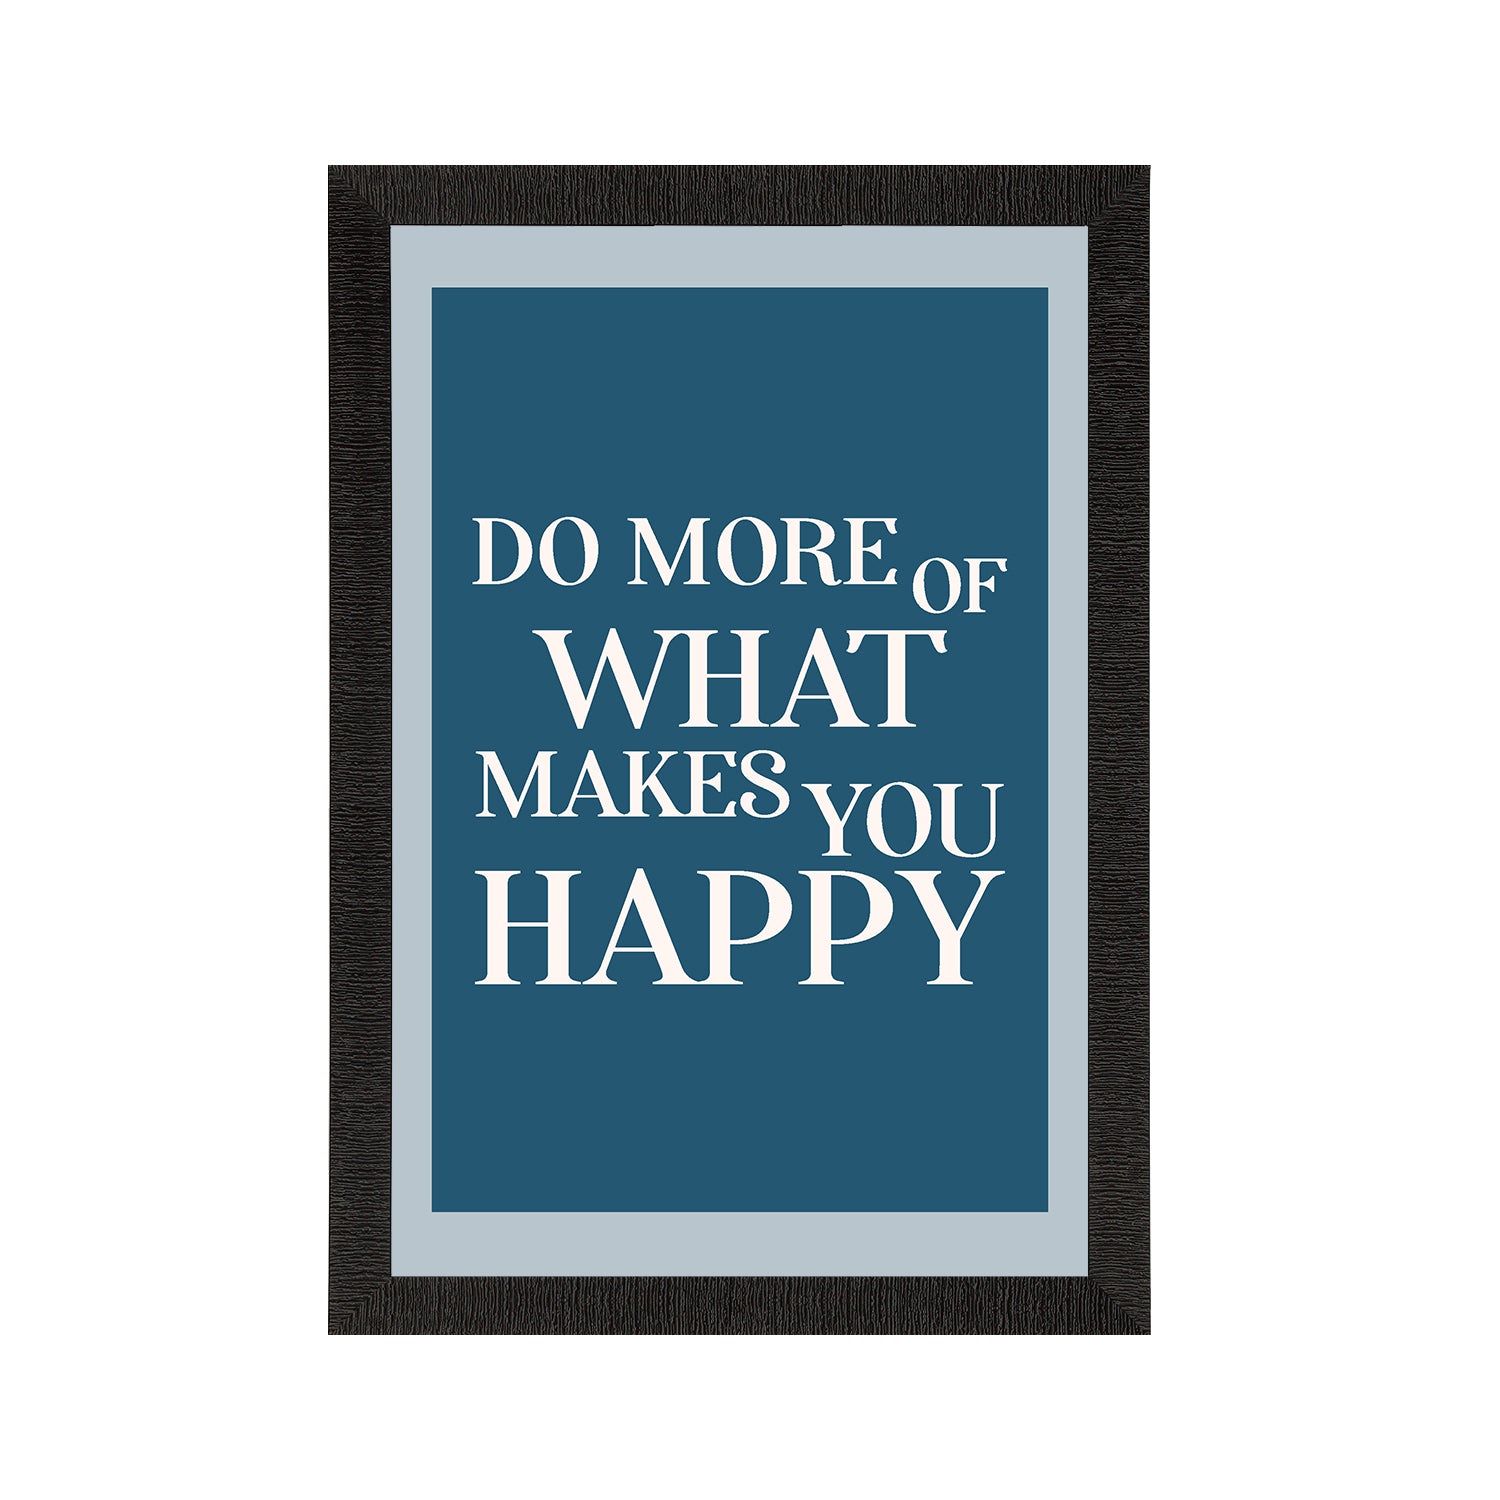 "Do more of what makes you happy" Motivational Quote Satin Matt Texture UV Art Painting